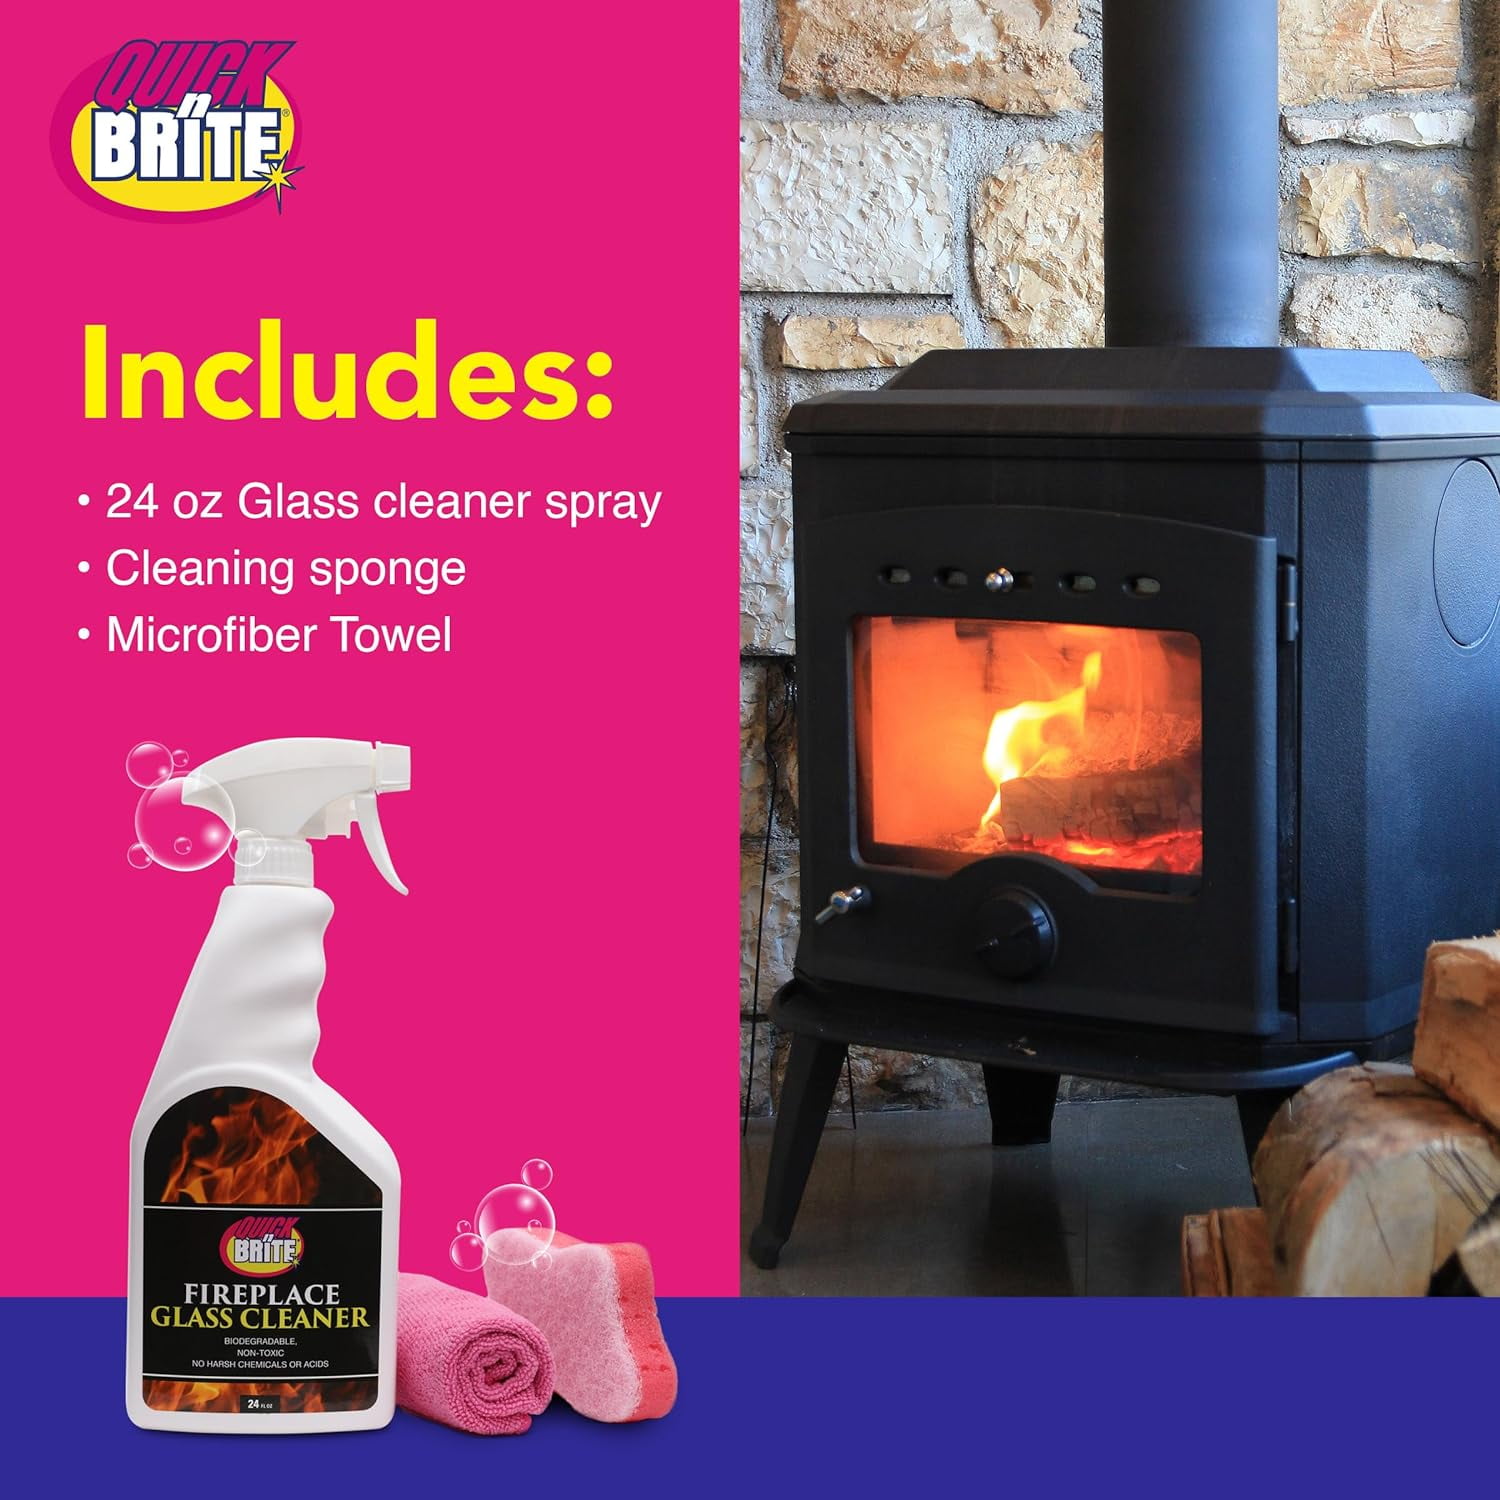 Stove Bright Fireplace Glass Window Cleaner, 16oz, 03M003